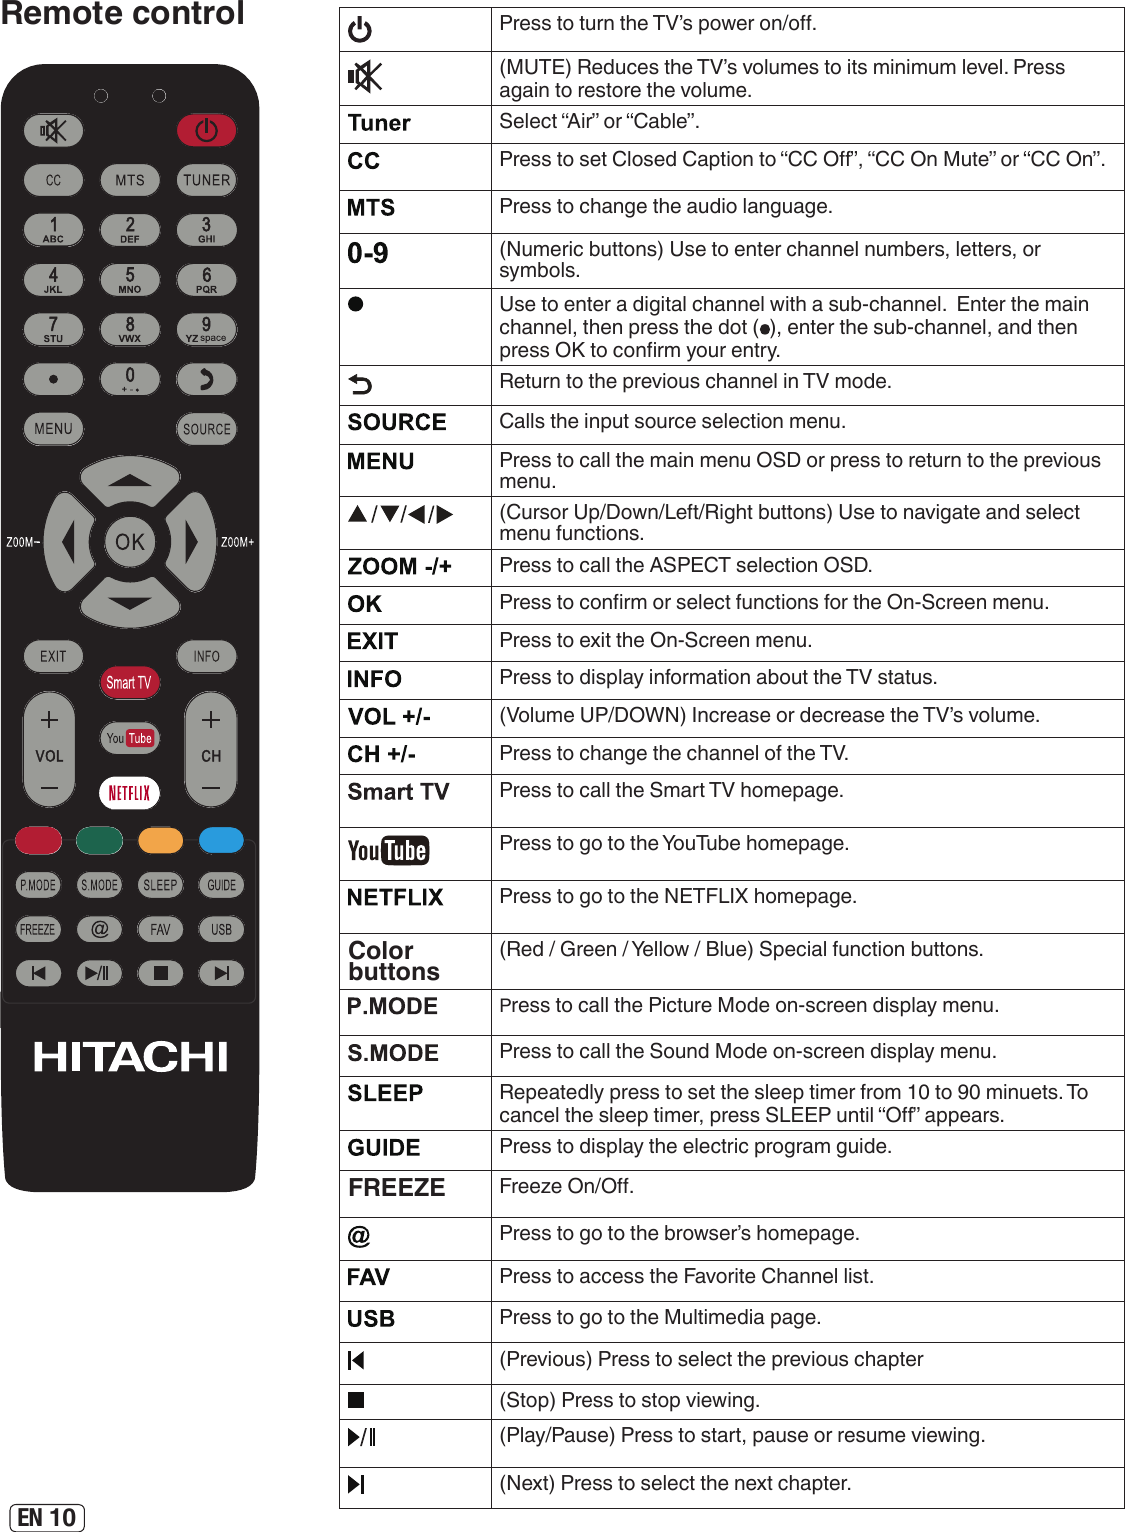 EN 10Remote control4Press to turn the TV’s power on/o.(MUTE) Reduces the TV’s volumes to its minimum level. Press again to restore the volume.Select “Air” or “Cable”.Press to set Closed Caption to “CC O”, “CC On Mute” or “CC On”. Press to change the audio language.(Numeric buttons) Use to enter channel numbers, letters, or symbols.Use to enter a digital channel with a sub-channel.  Enter the main channel, then press the dot (  ), enter the sub-channel, and then press OK to conrm your entry.Return to the previous channel in TV mode.Calls the input source selection menu.Press to call the main menu OSD or press to return to the previous menu.(Cursor Up/Down/Left/Right buttons) Use to navigate and select menu functions.Press to call the ASPECT selection OSD.Press to conrm or select functions for the On-Screen menu.Press to exit the On-Screen menu.Press to display information about the TV status.(Volume UP/DOWN) Increase or decrease the TV’s volume.Press to change the channel of the TV.Press to call the Smart TV homepage.Press to go to the YouTube homepage.Press to go to the NETFLIX homepage.Colorbuttons (Red / Green / Yellow / Blue) Special function buttons.Press to call the Picture Mode on-screen display menu. Press to call the Sound Mode on-screen display menu. Repeatedly press to set the sleep timer from 10 to 90 minuets. To cancel the sleep timer, press SLEEP until “O” appears.Press to display the electric program guide.FREEZE Freeze On/O.Press to go to the browser’s homepage.Press to access the Favorite Channel list.Press to go to the Multimedia page.(Previous) Press to select the previous chapter(Stop) Press to stop viewing.(Play/Pause) Press to start, pause or resume viewing.(Next) Press to select the next chapter.